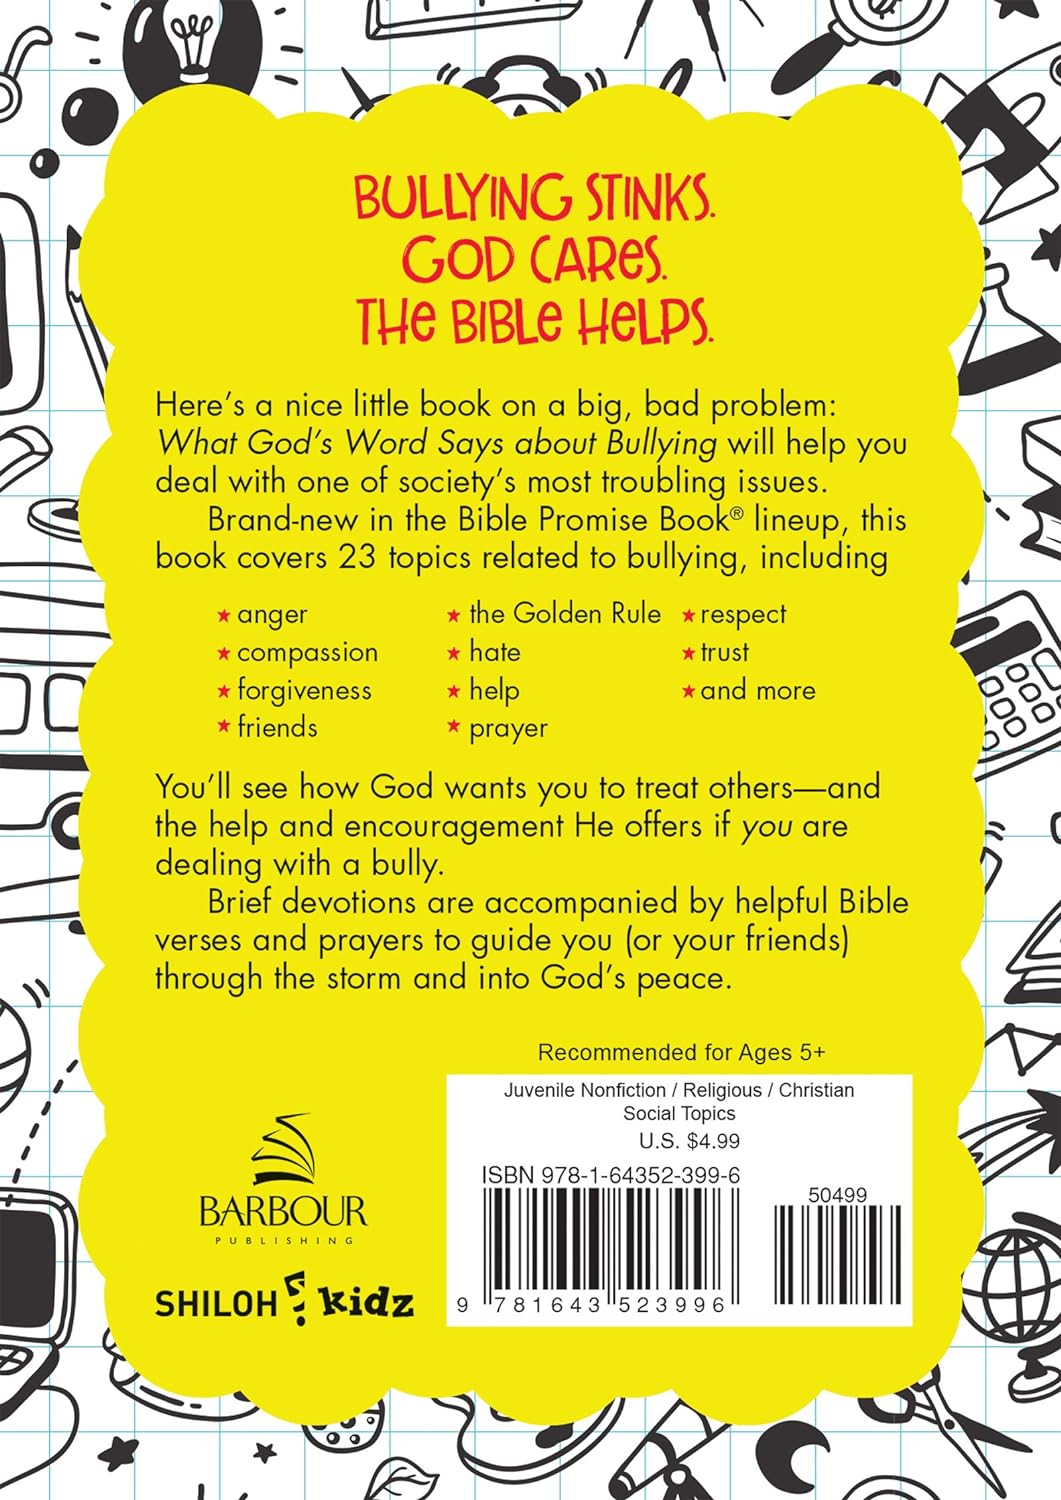 What God's Word Says About Bullying